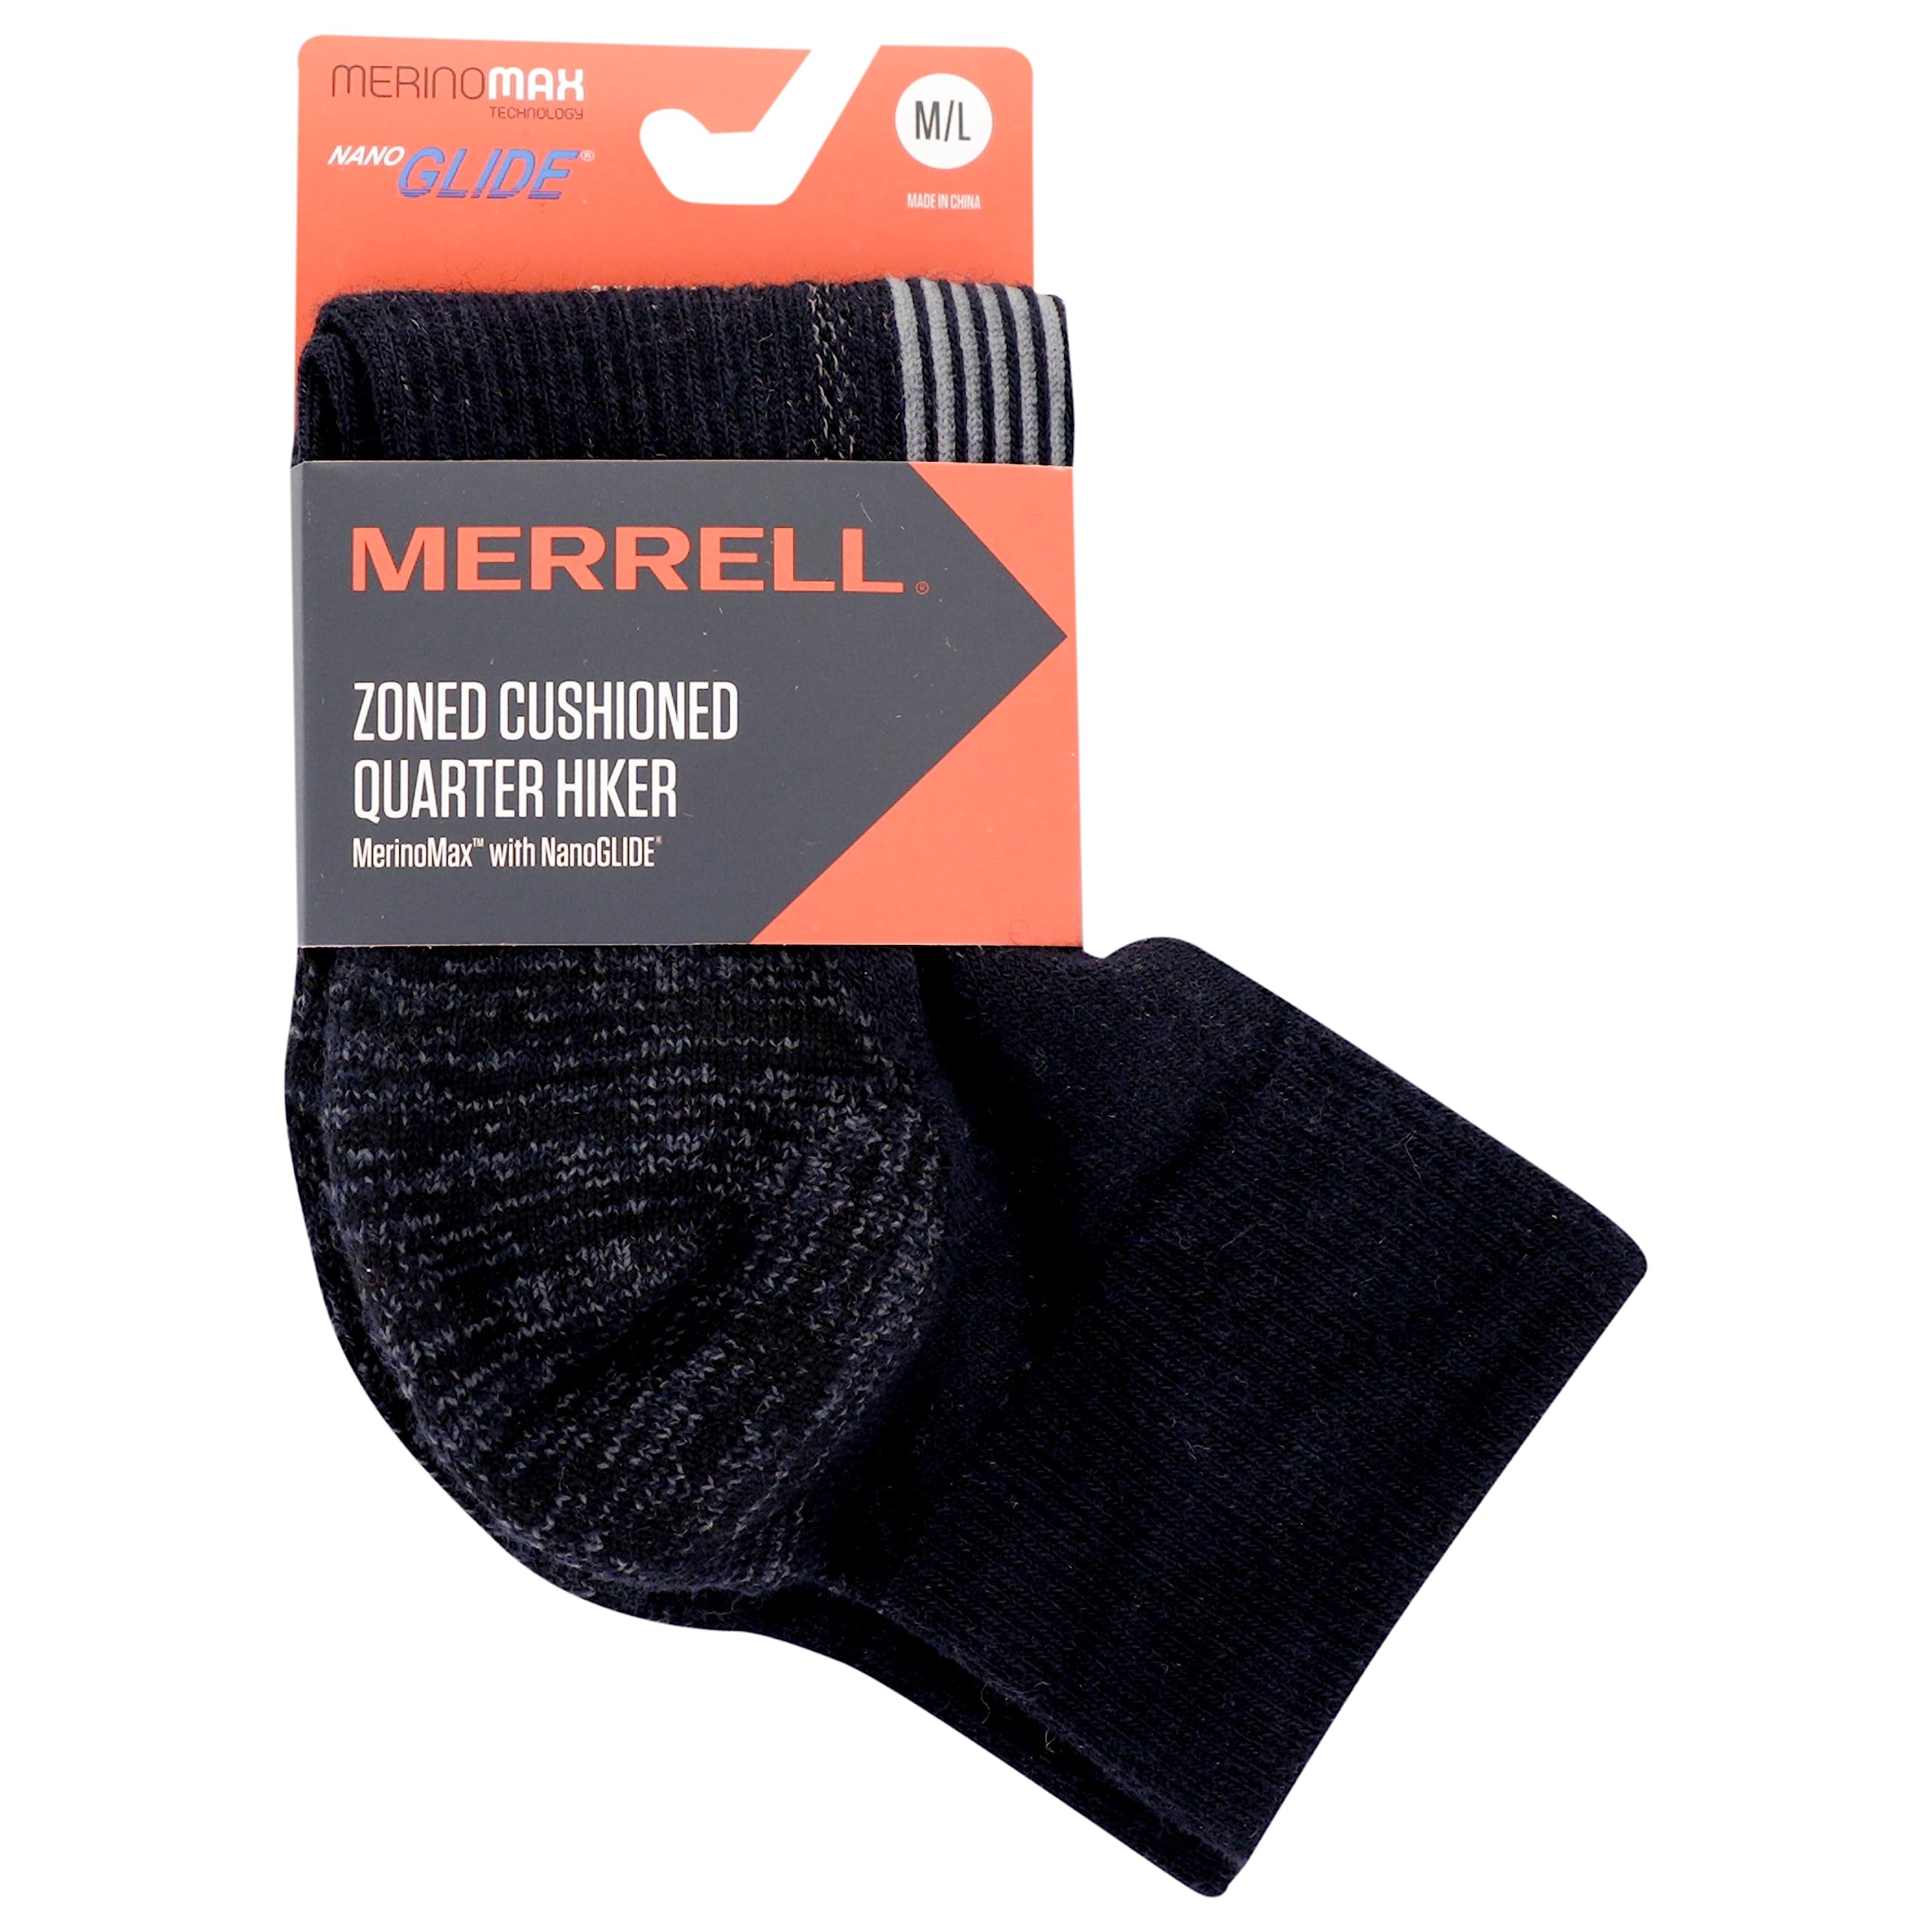 Merrell Men's and Women's Zoned Cushioned Wool Hiking Socks-1 Pair Pack-Breathable Unisex Arch Support